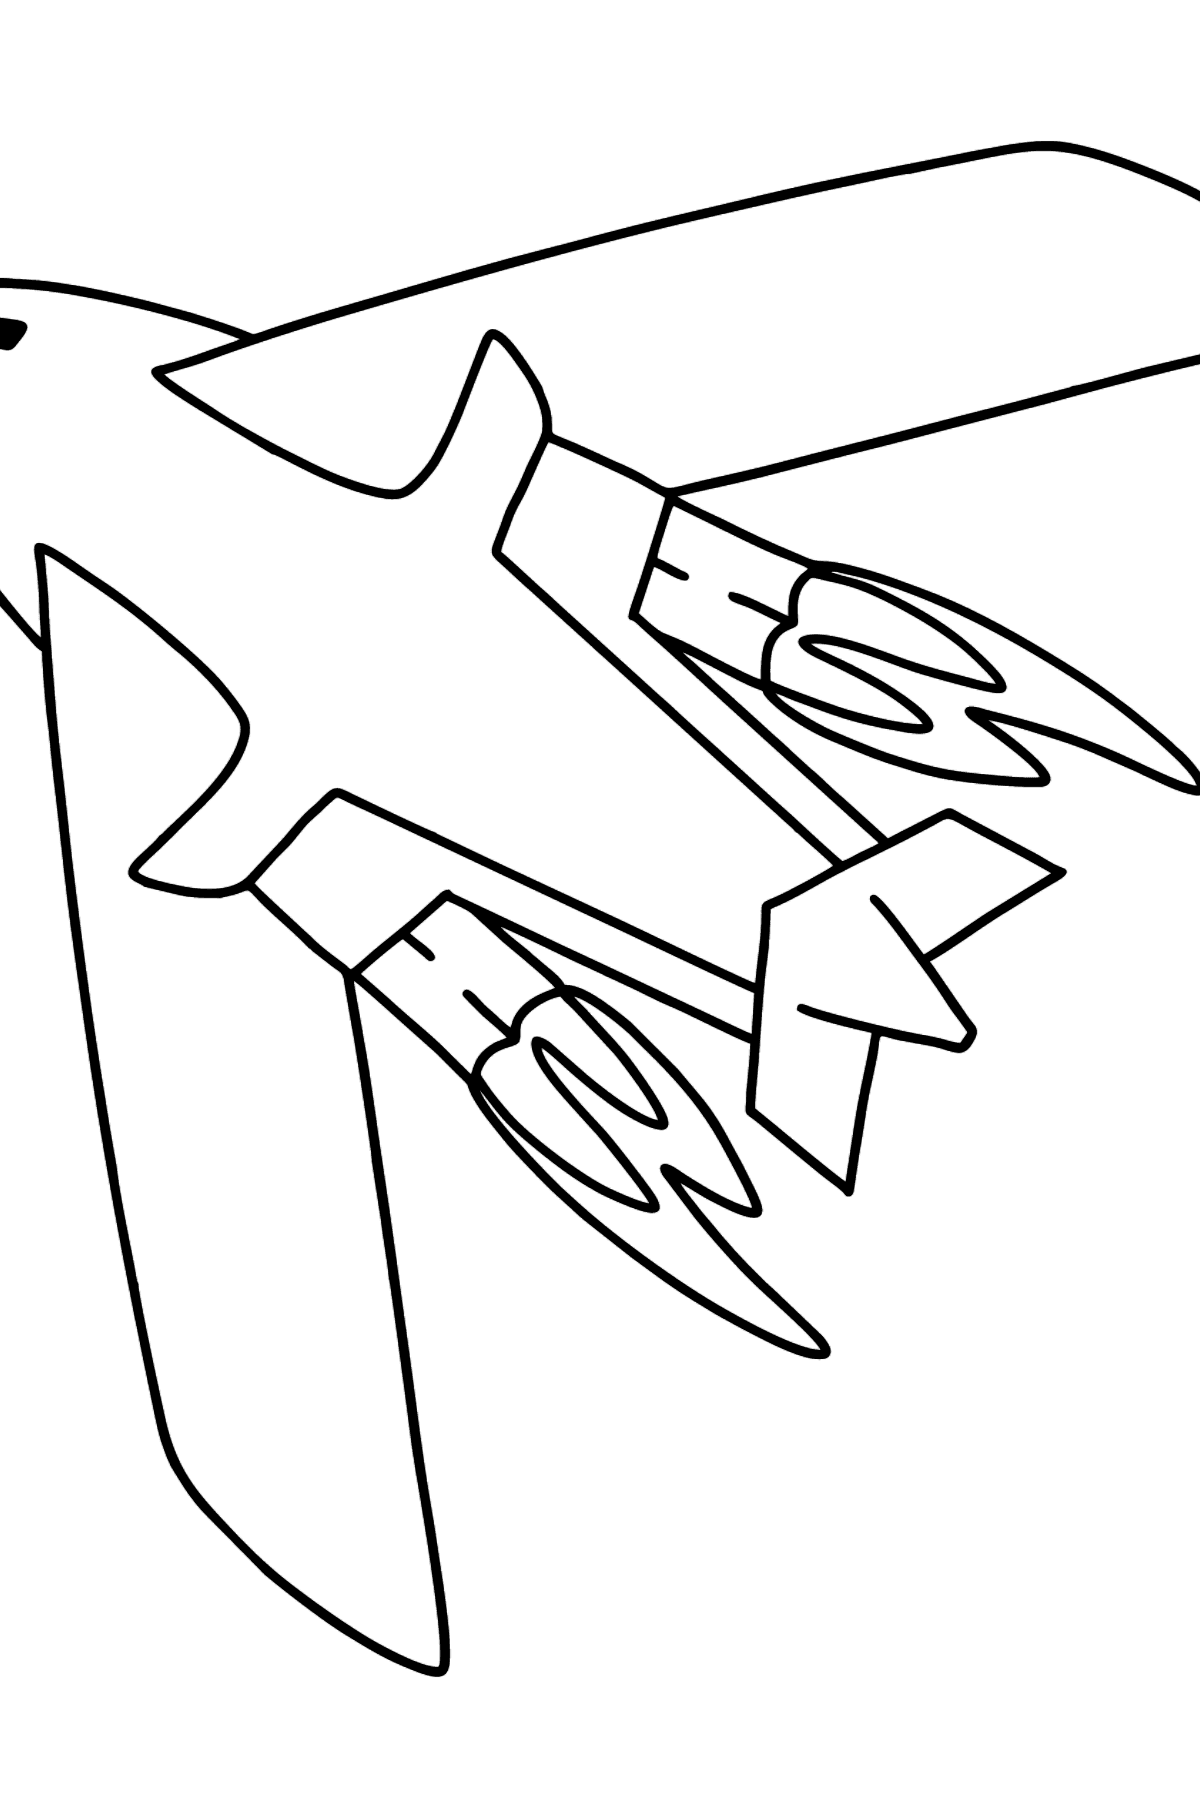 Airplane Tu-160 (White Swan) coloring page - Coloring Pages for Kids